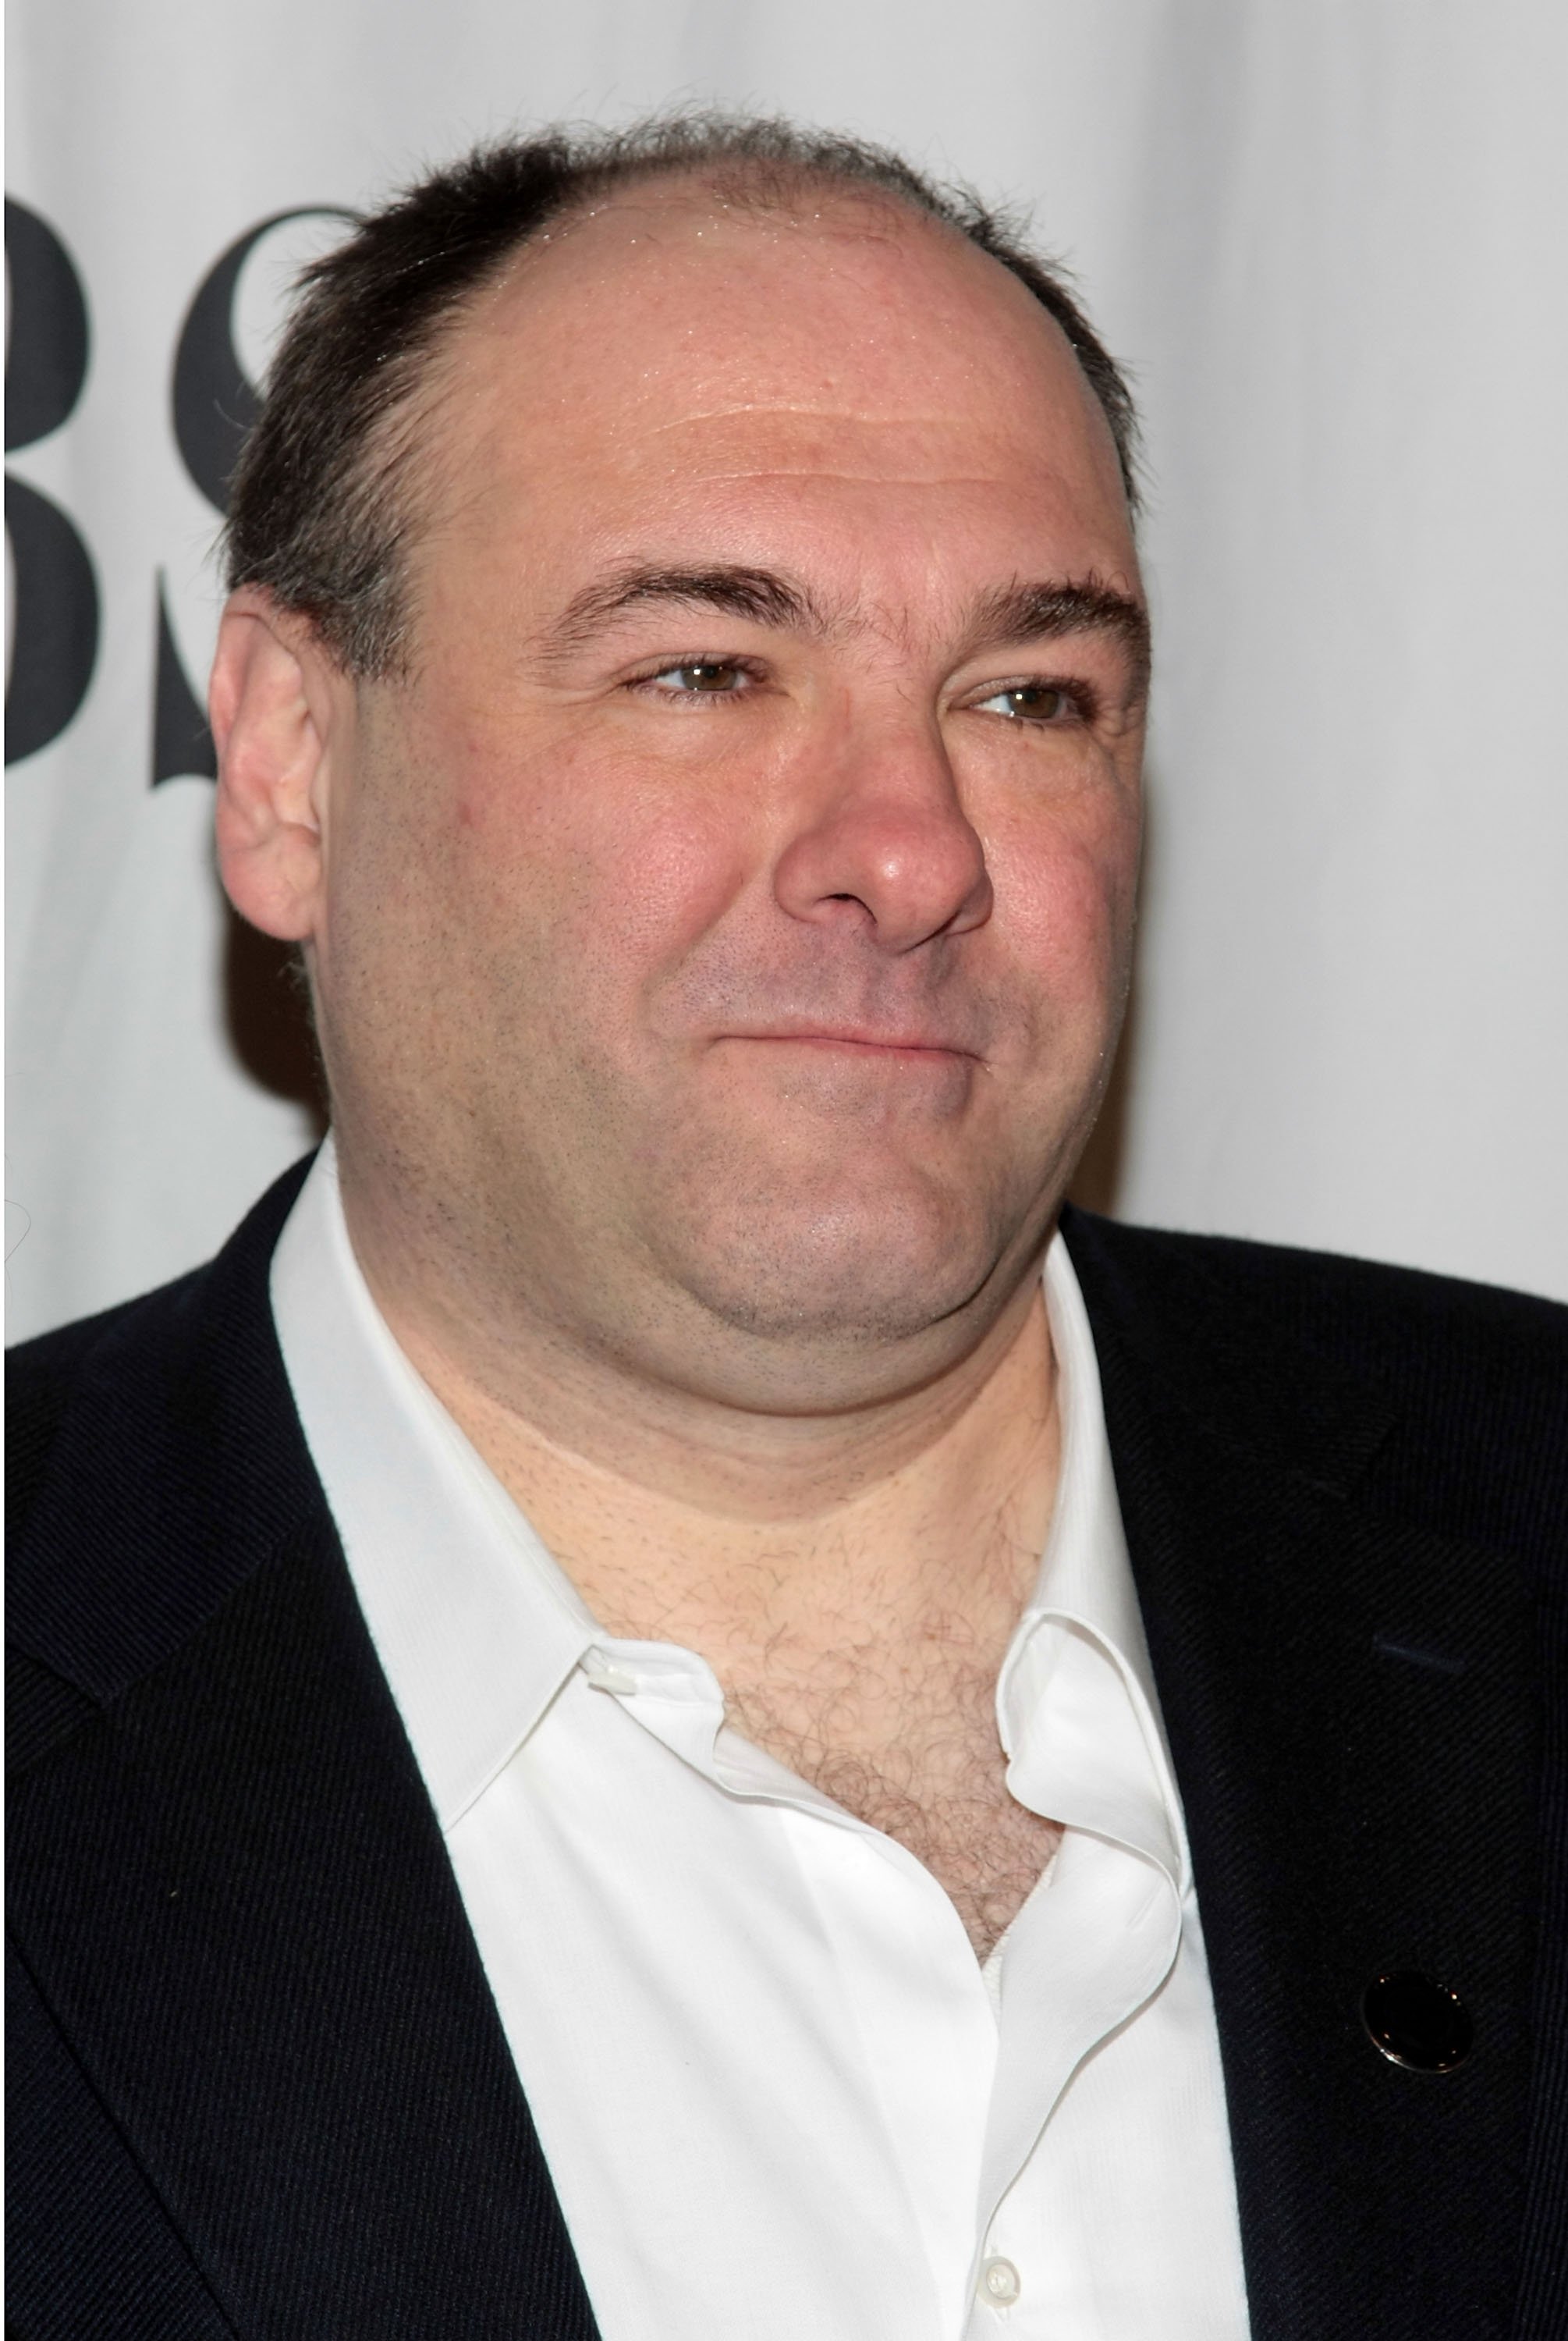 James Gandolfini received more than 21 Awards for his portrayal of Tony Soprano. Image credit: Getty/GlobalImagesUkraine